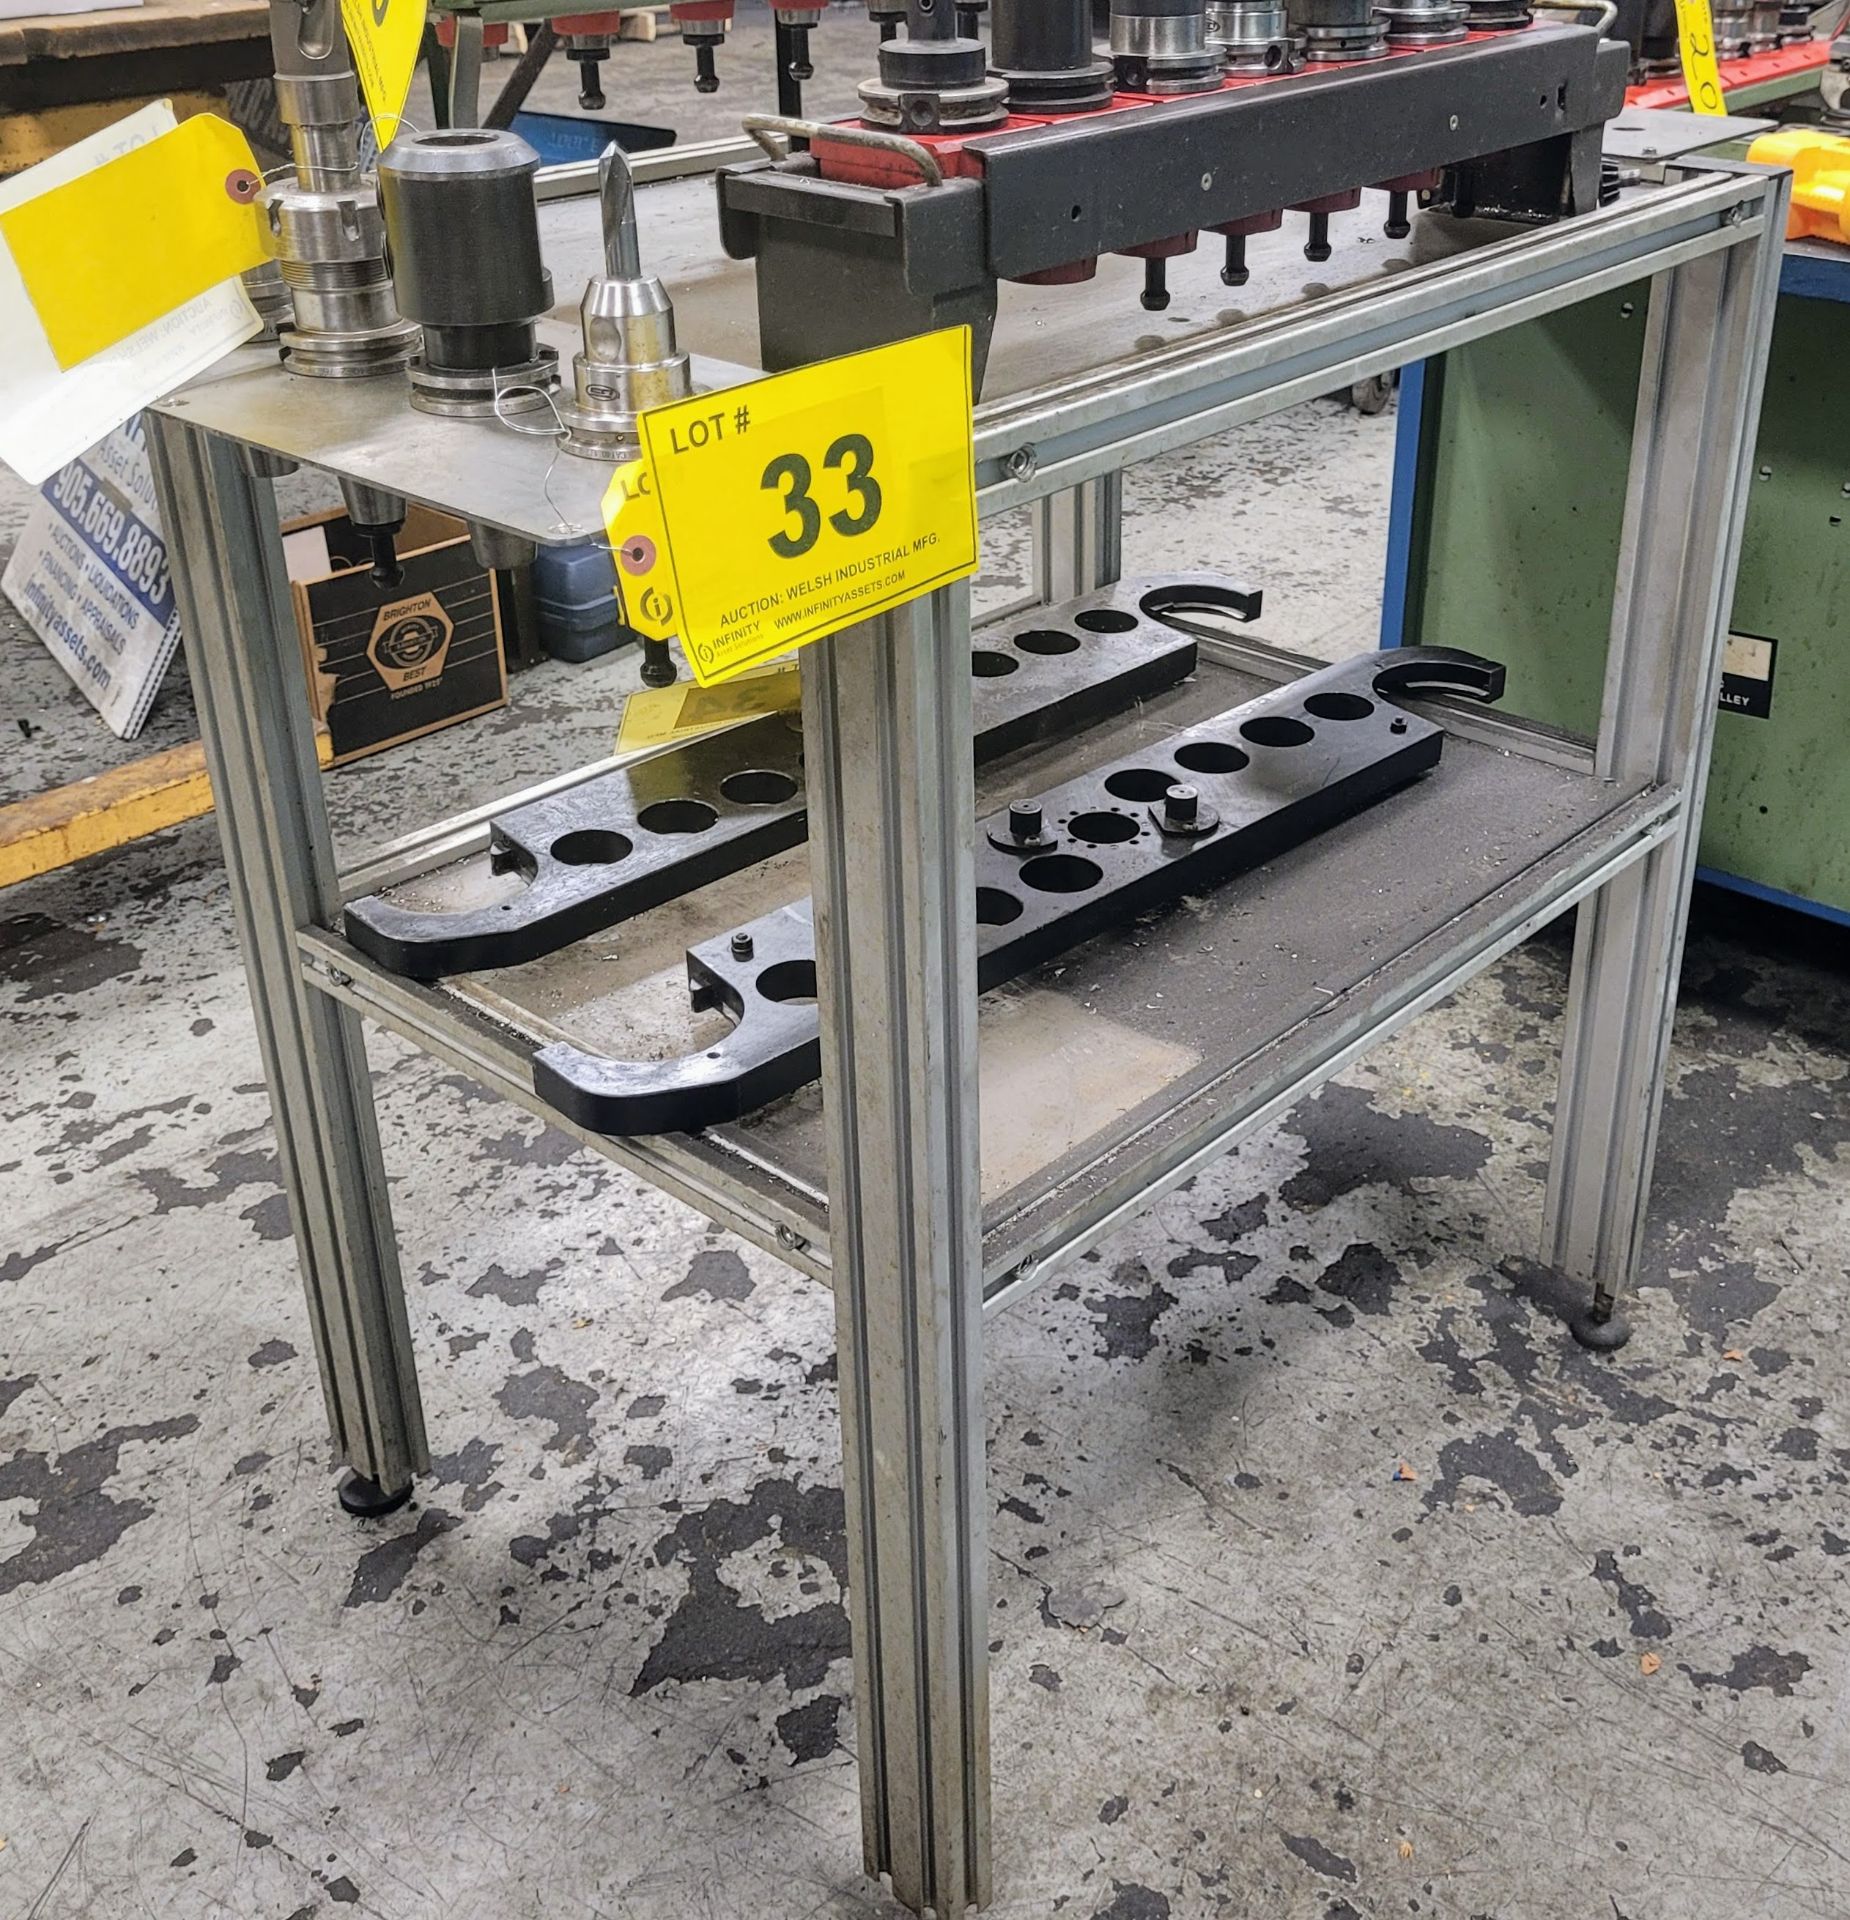 2-LEVEL TOOL HOLDER TABLE W/ 8-SLOTS (NO CONTENTS)